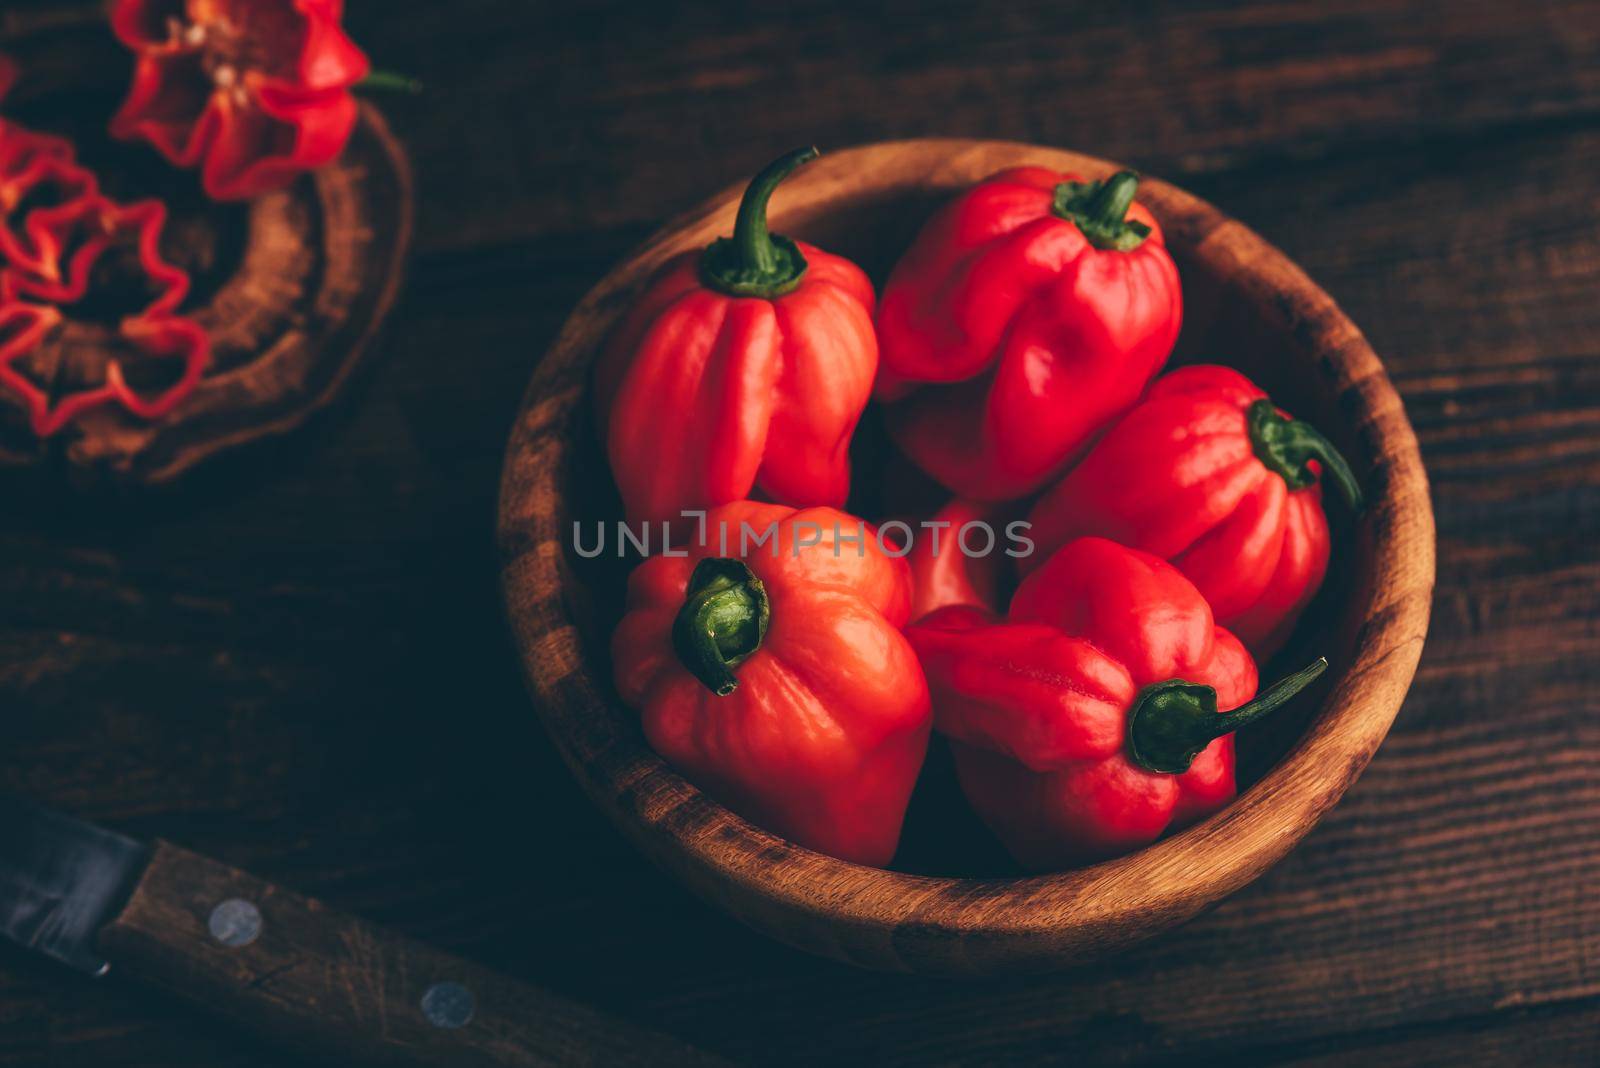 Red Habanero Chili Peppers in a Wooden Bowl on a Rustic Table